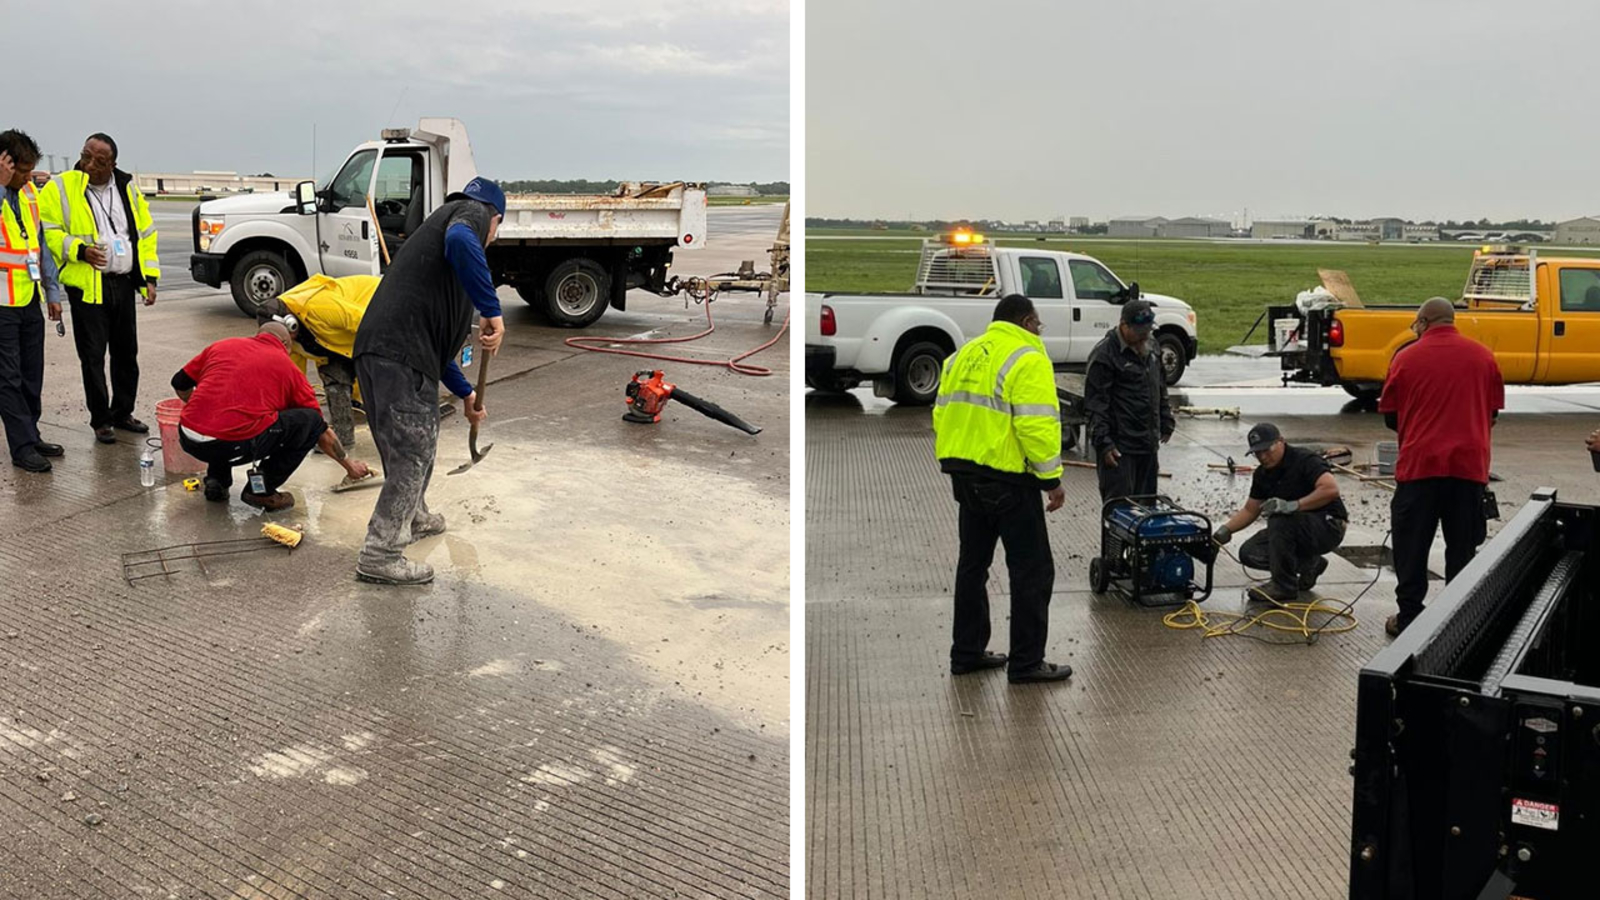 Houston severe weather today: Hobby Airport runway reopened after lightning strike forces closure for repairs [Video]